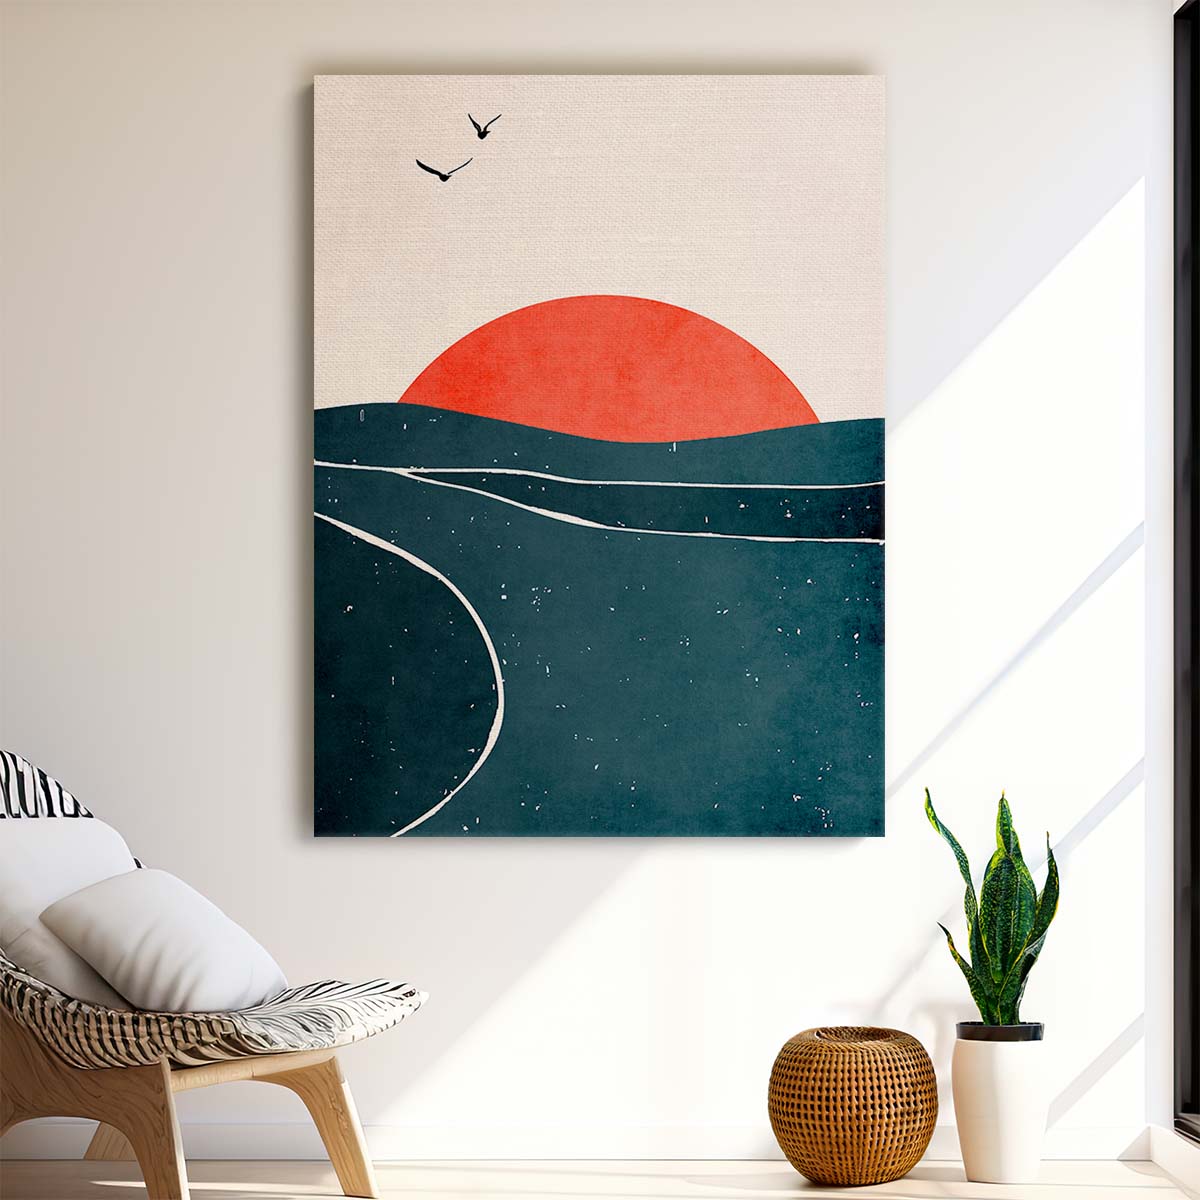 Kubistika Illustration of Seagulls at Red Sunset Landscape by Luxuriance Designs, made in USA